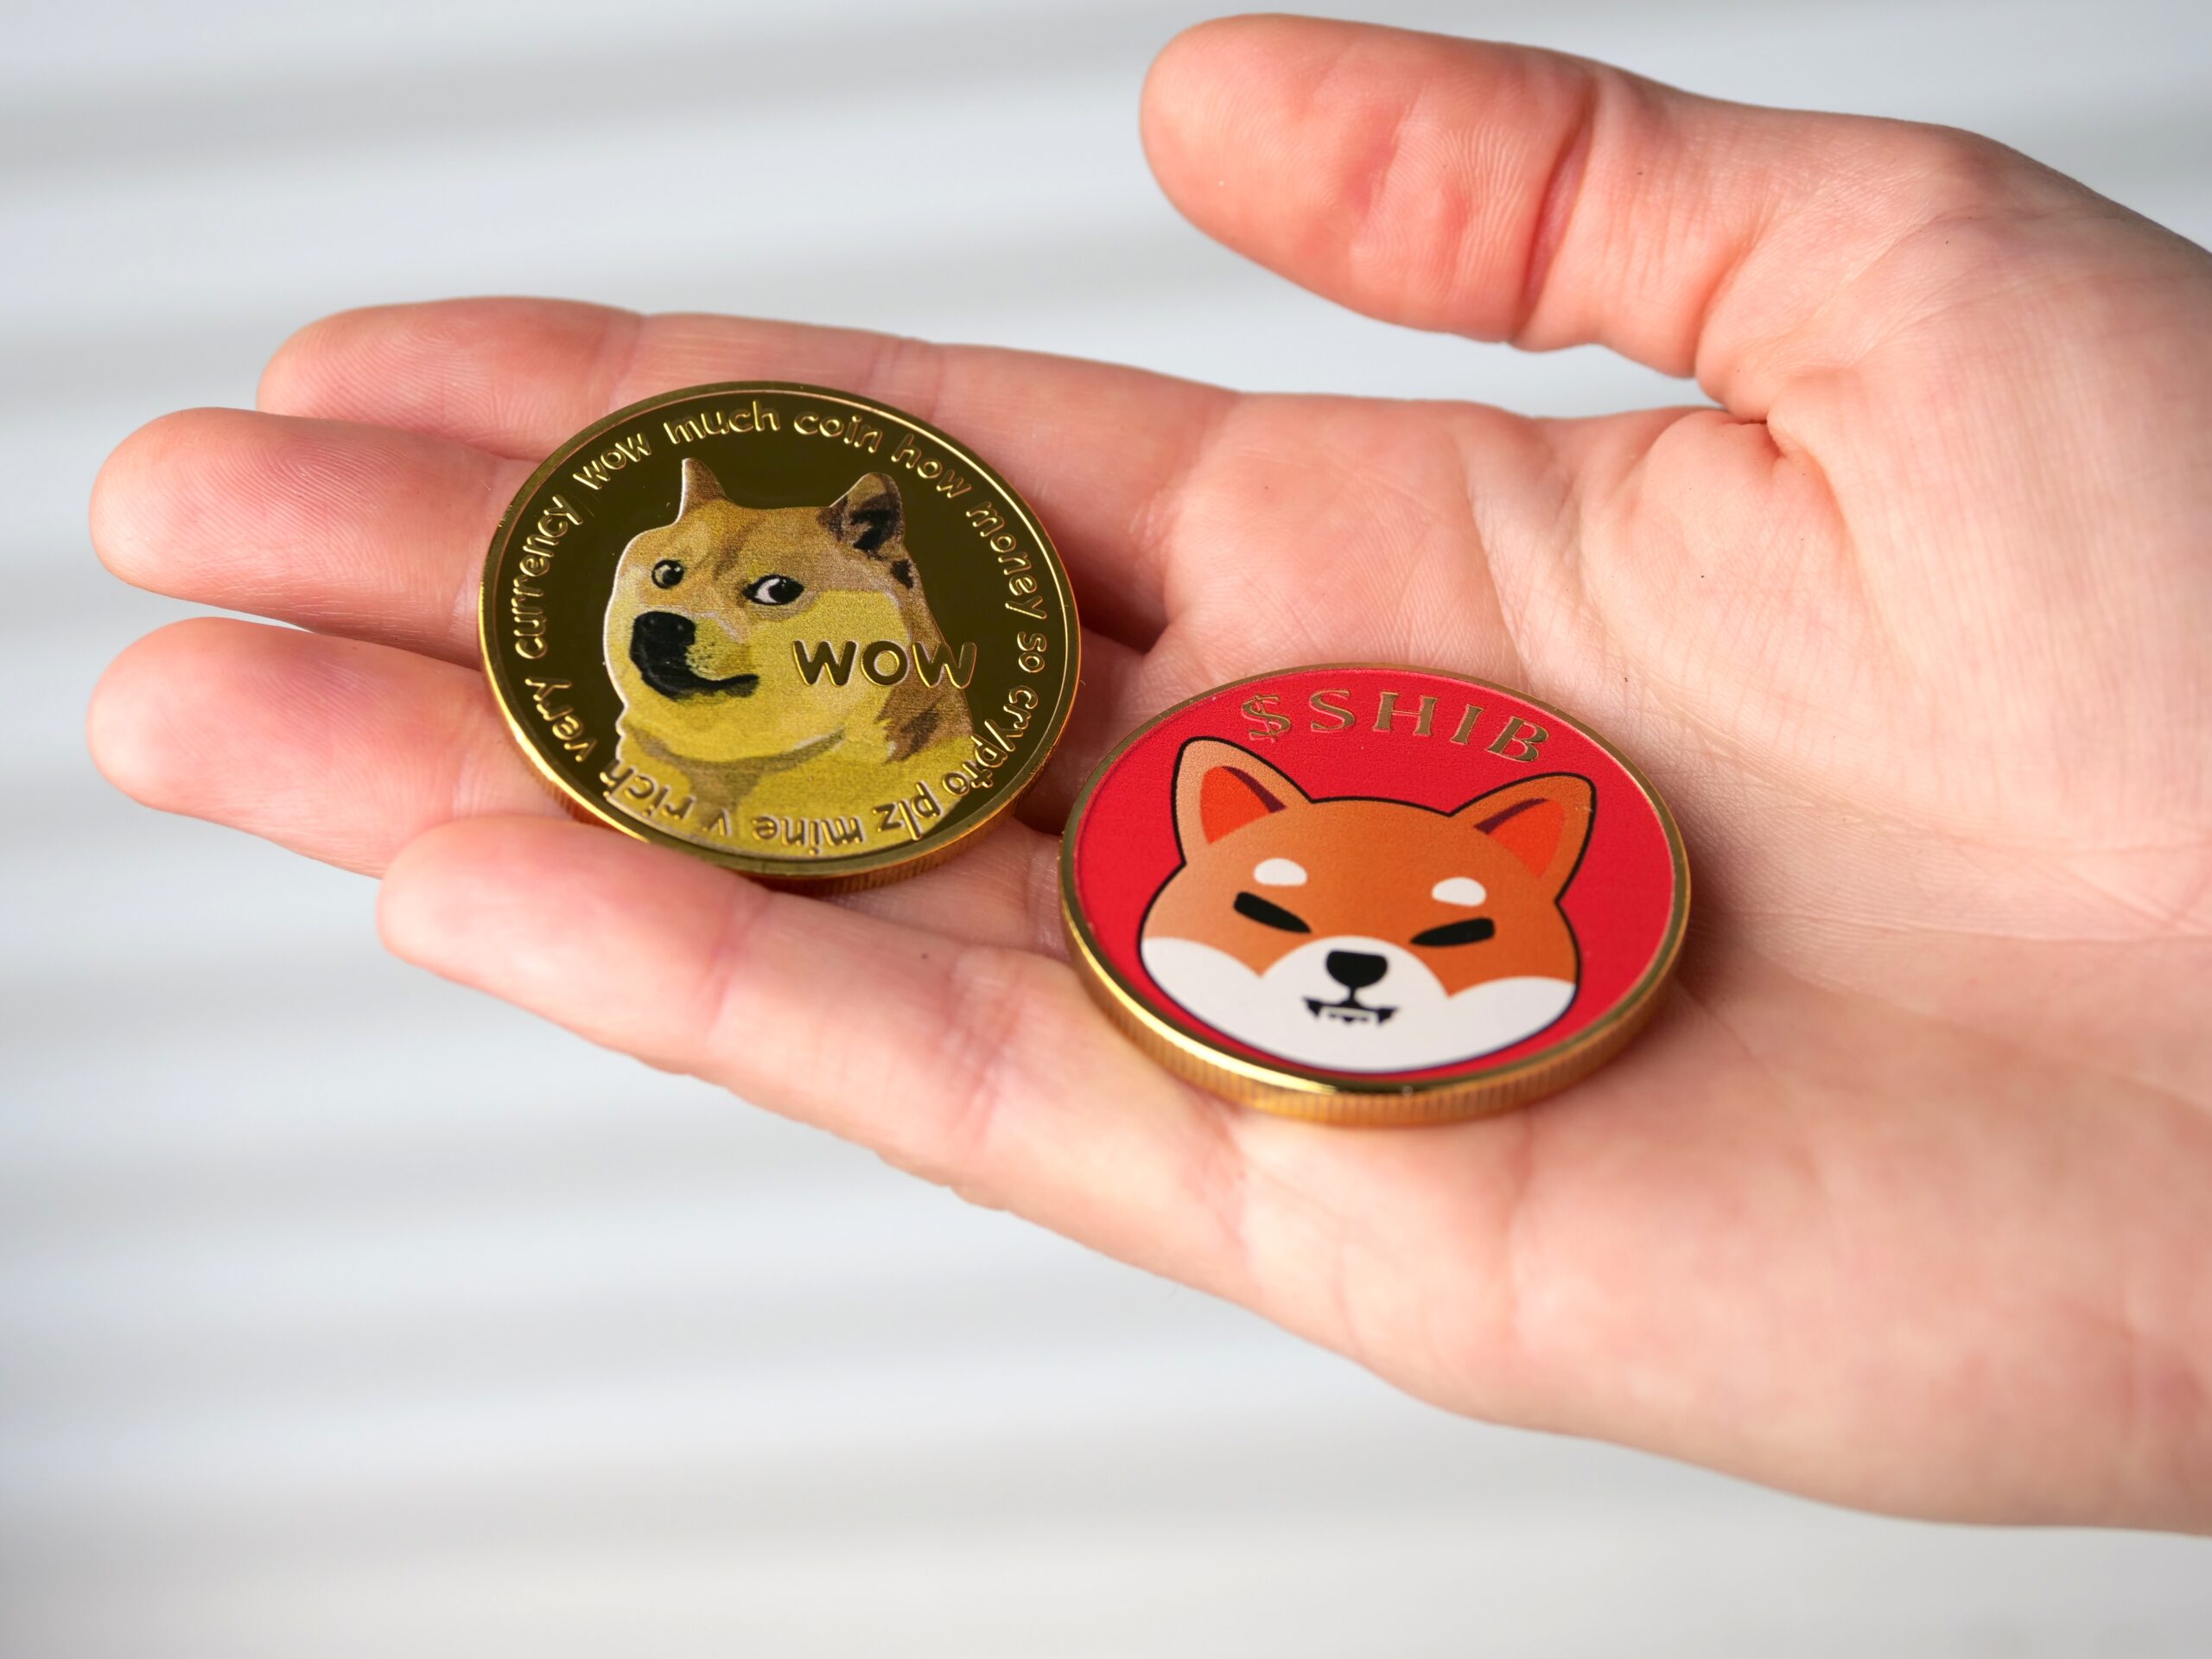 Shiba Inu (SHIB) is known as the second largest meme token. It has grown rapidly in popularity and is being used for several things.